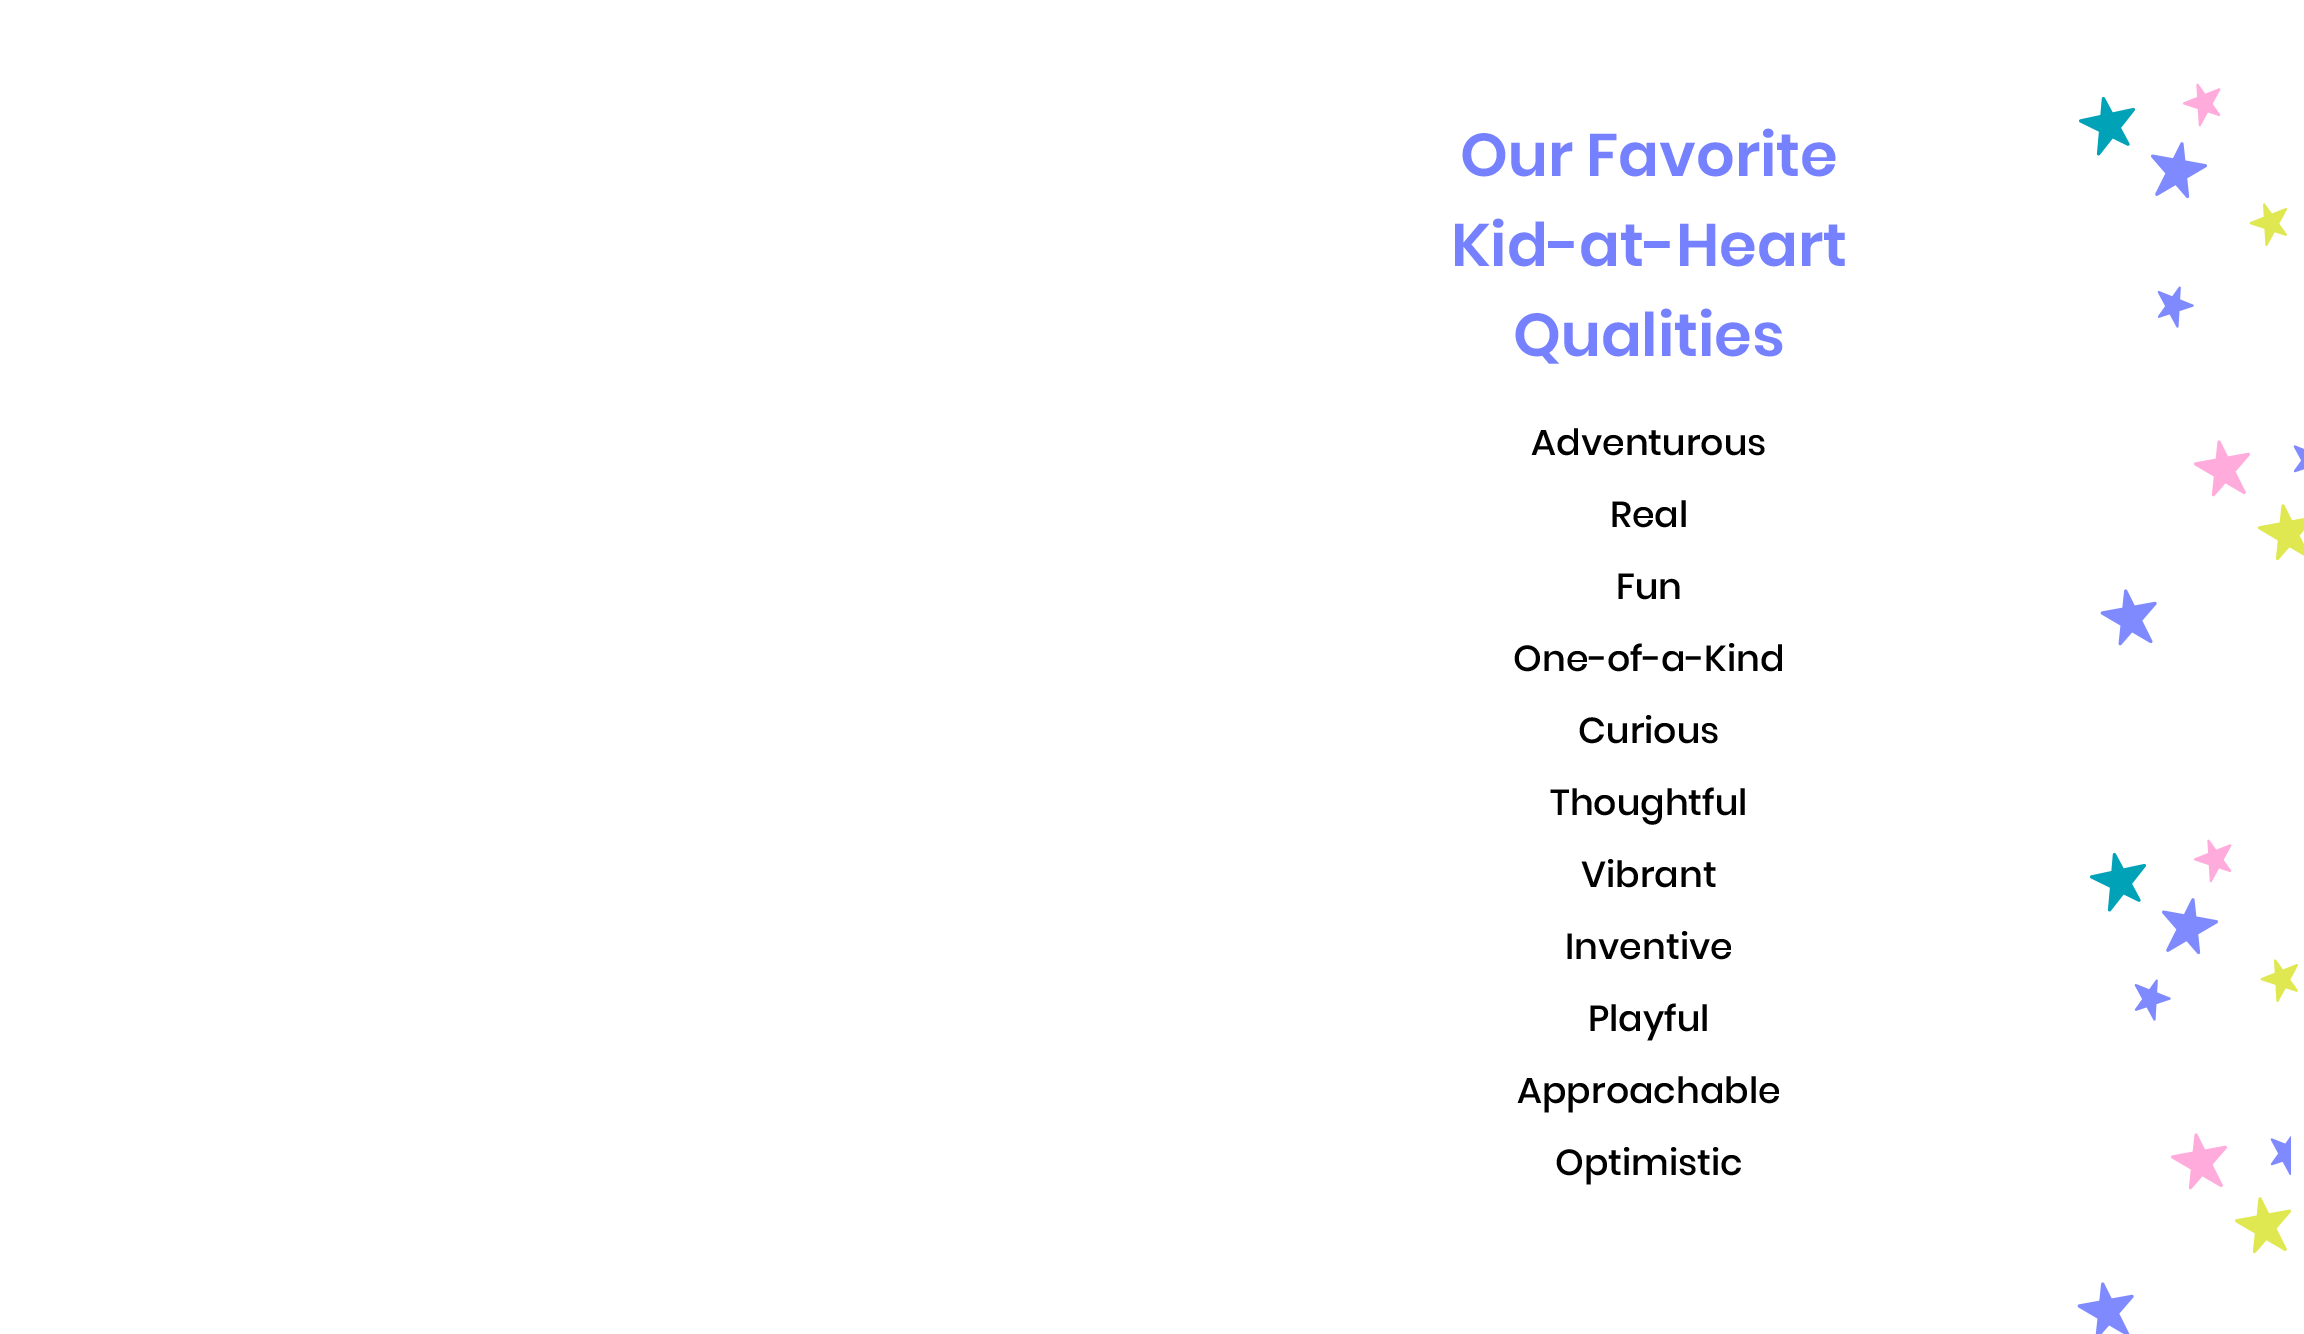 Our Favorite Kid-at-Heart Qualities